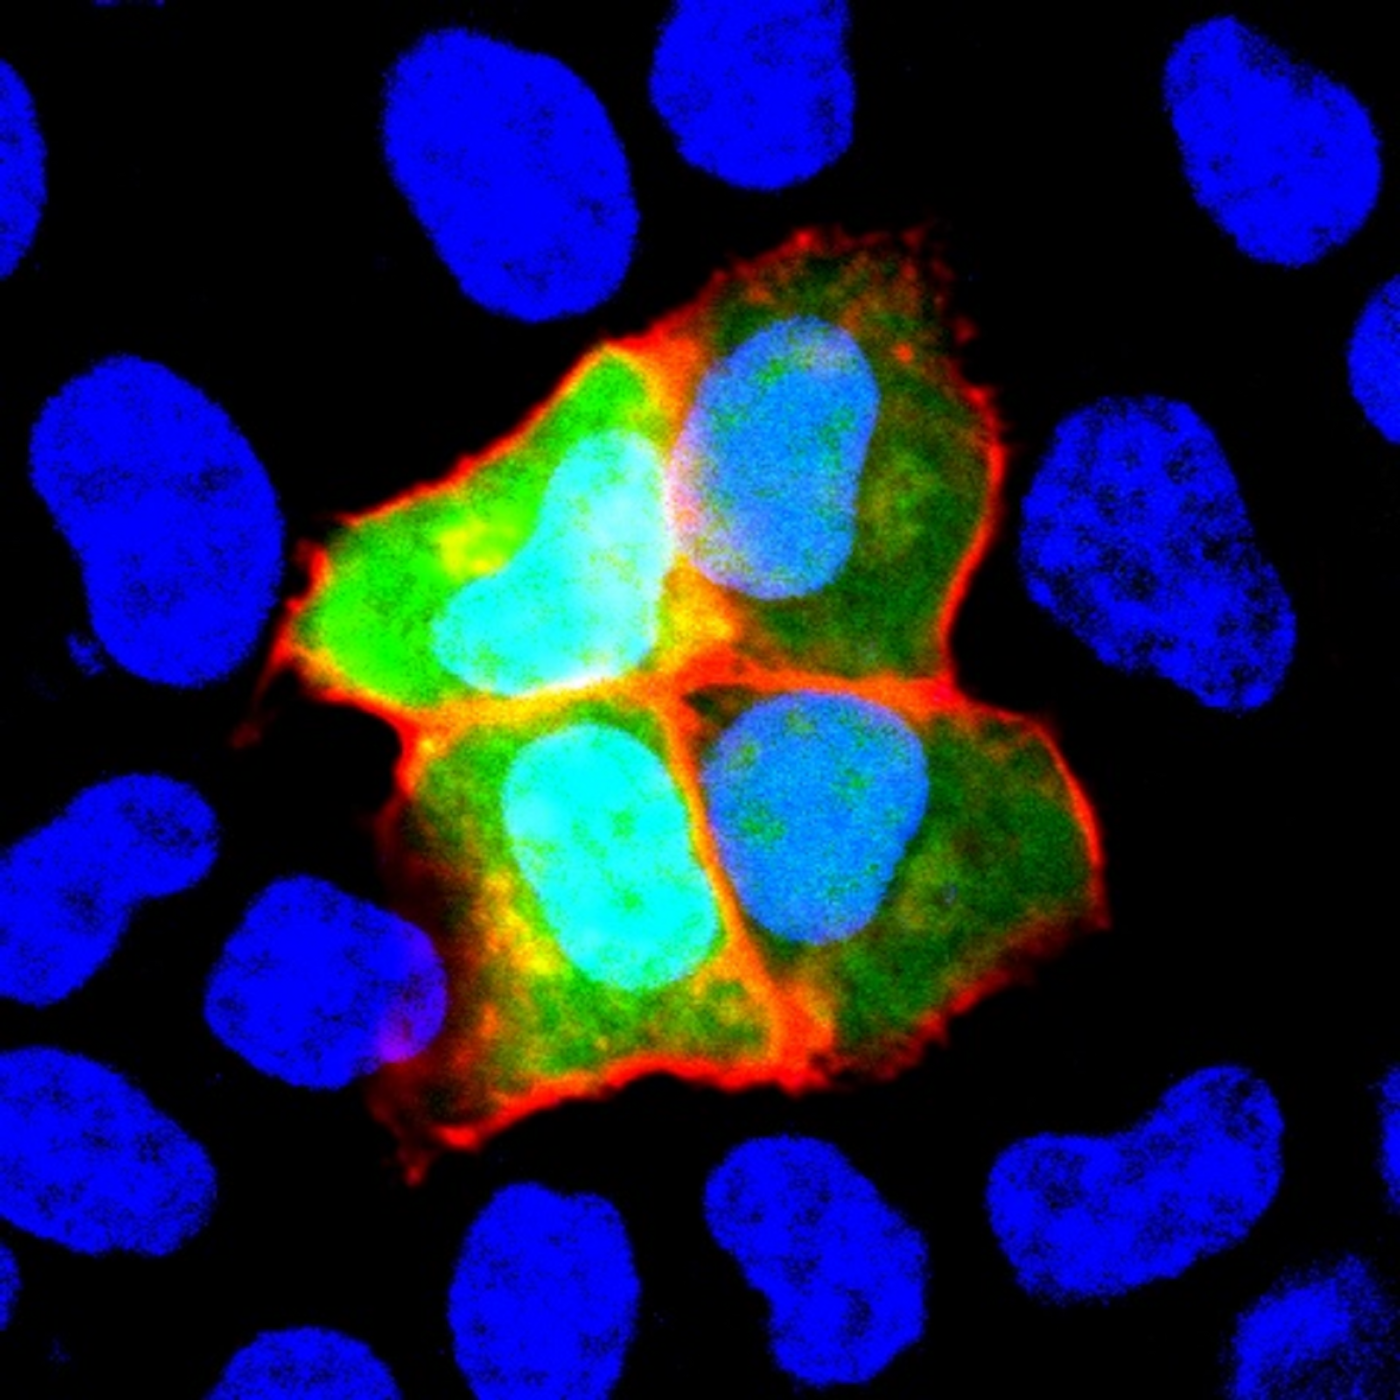 NCAM1 expression (green) is induced in HeLa cells, while an NCAM1 autoantibody in patient serum (red) reacts specifically to those cells / Image credit: Department of Psychiatry and Behavioral Sciences, TMDU